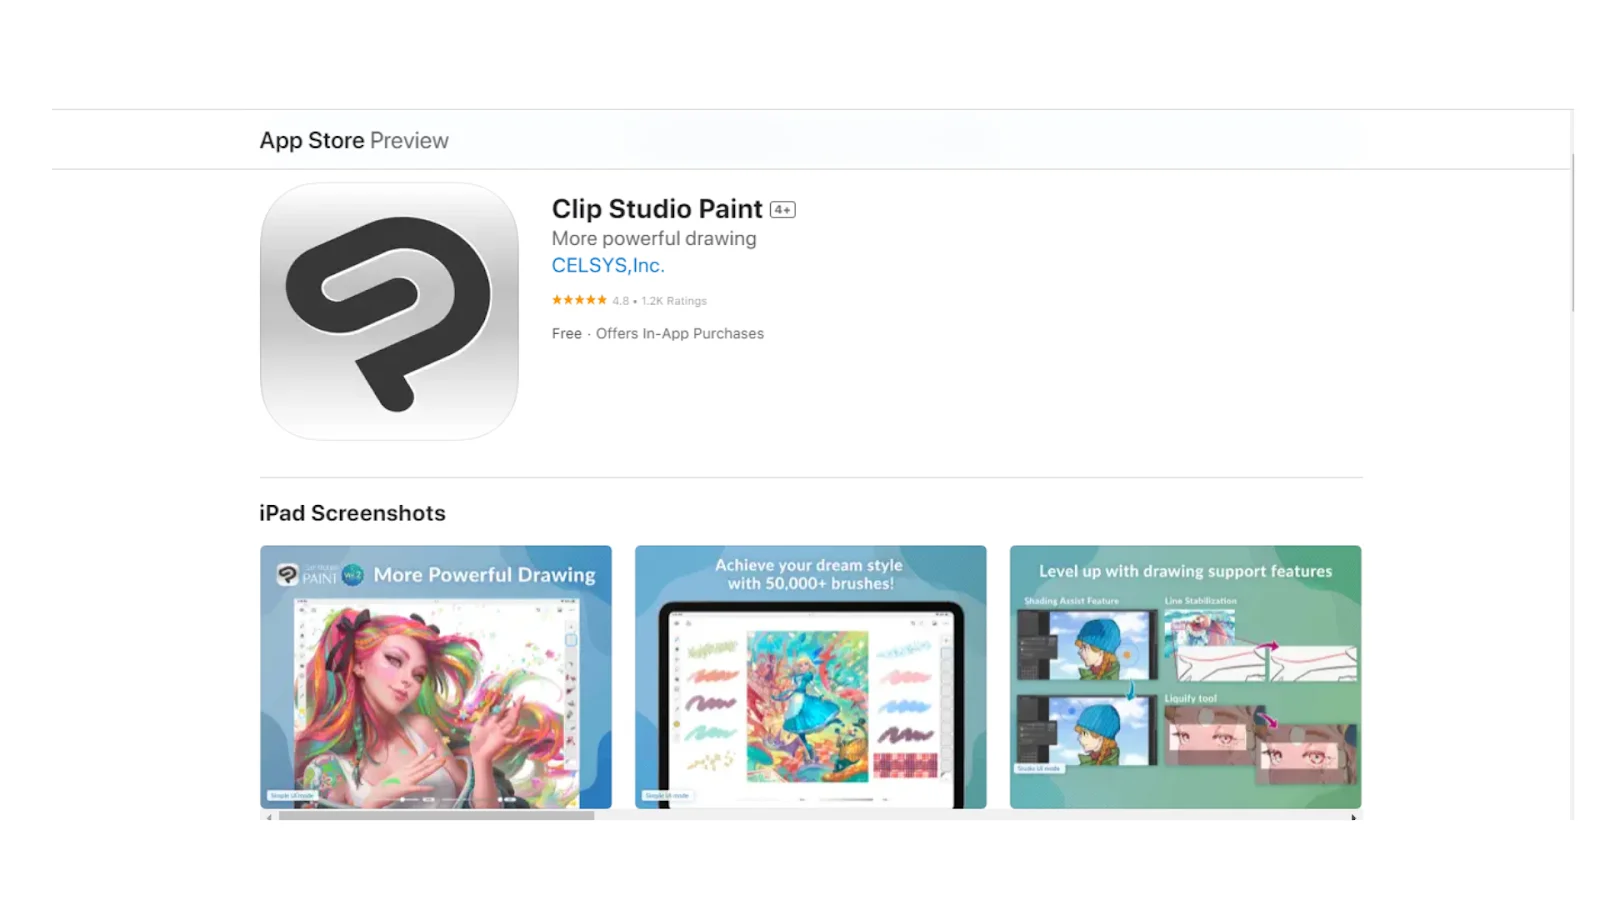 Free Drawing Apps on Ipad - Lemon8 Search